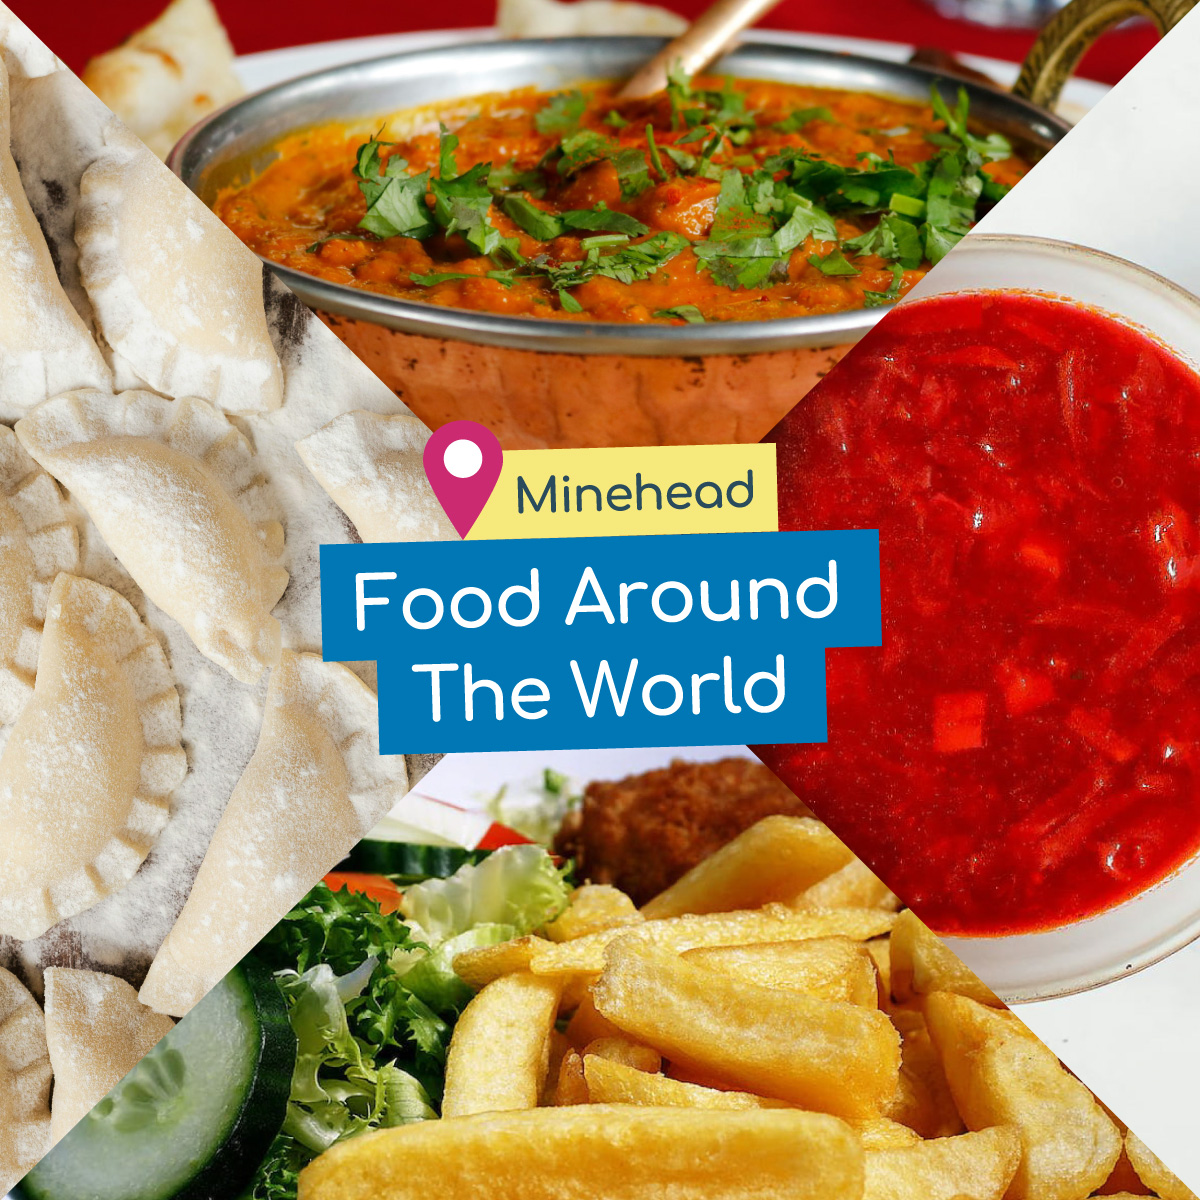 Calling all foodies, we have the perfect courses for you! Join our “Discover Food around the World” courses at the Minehead Eye to get your taste buds tingling. Get set to embark on gastronomic adventures: shorturl.at/dlqJ7 #SSL #Minehead #MineheadCourses #Foodies